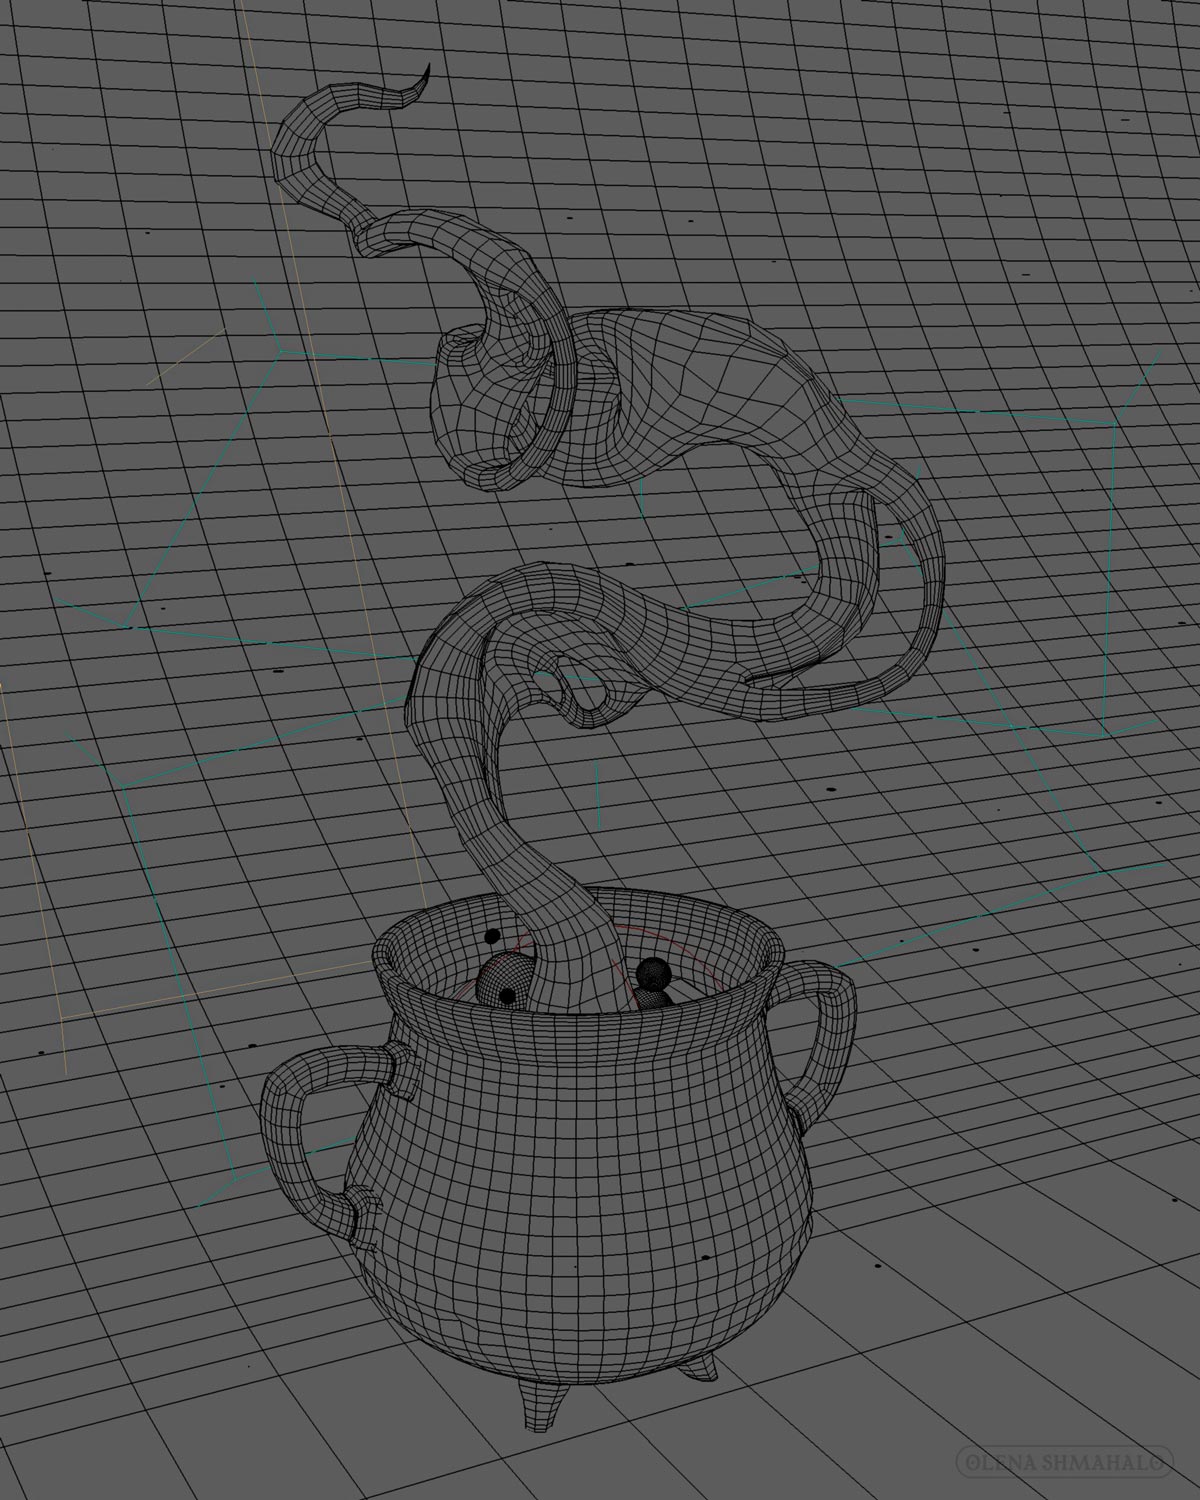 Wireframe: 3D sculpture of a cauldron mug with iridescent smoke rising out of it.